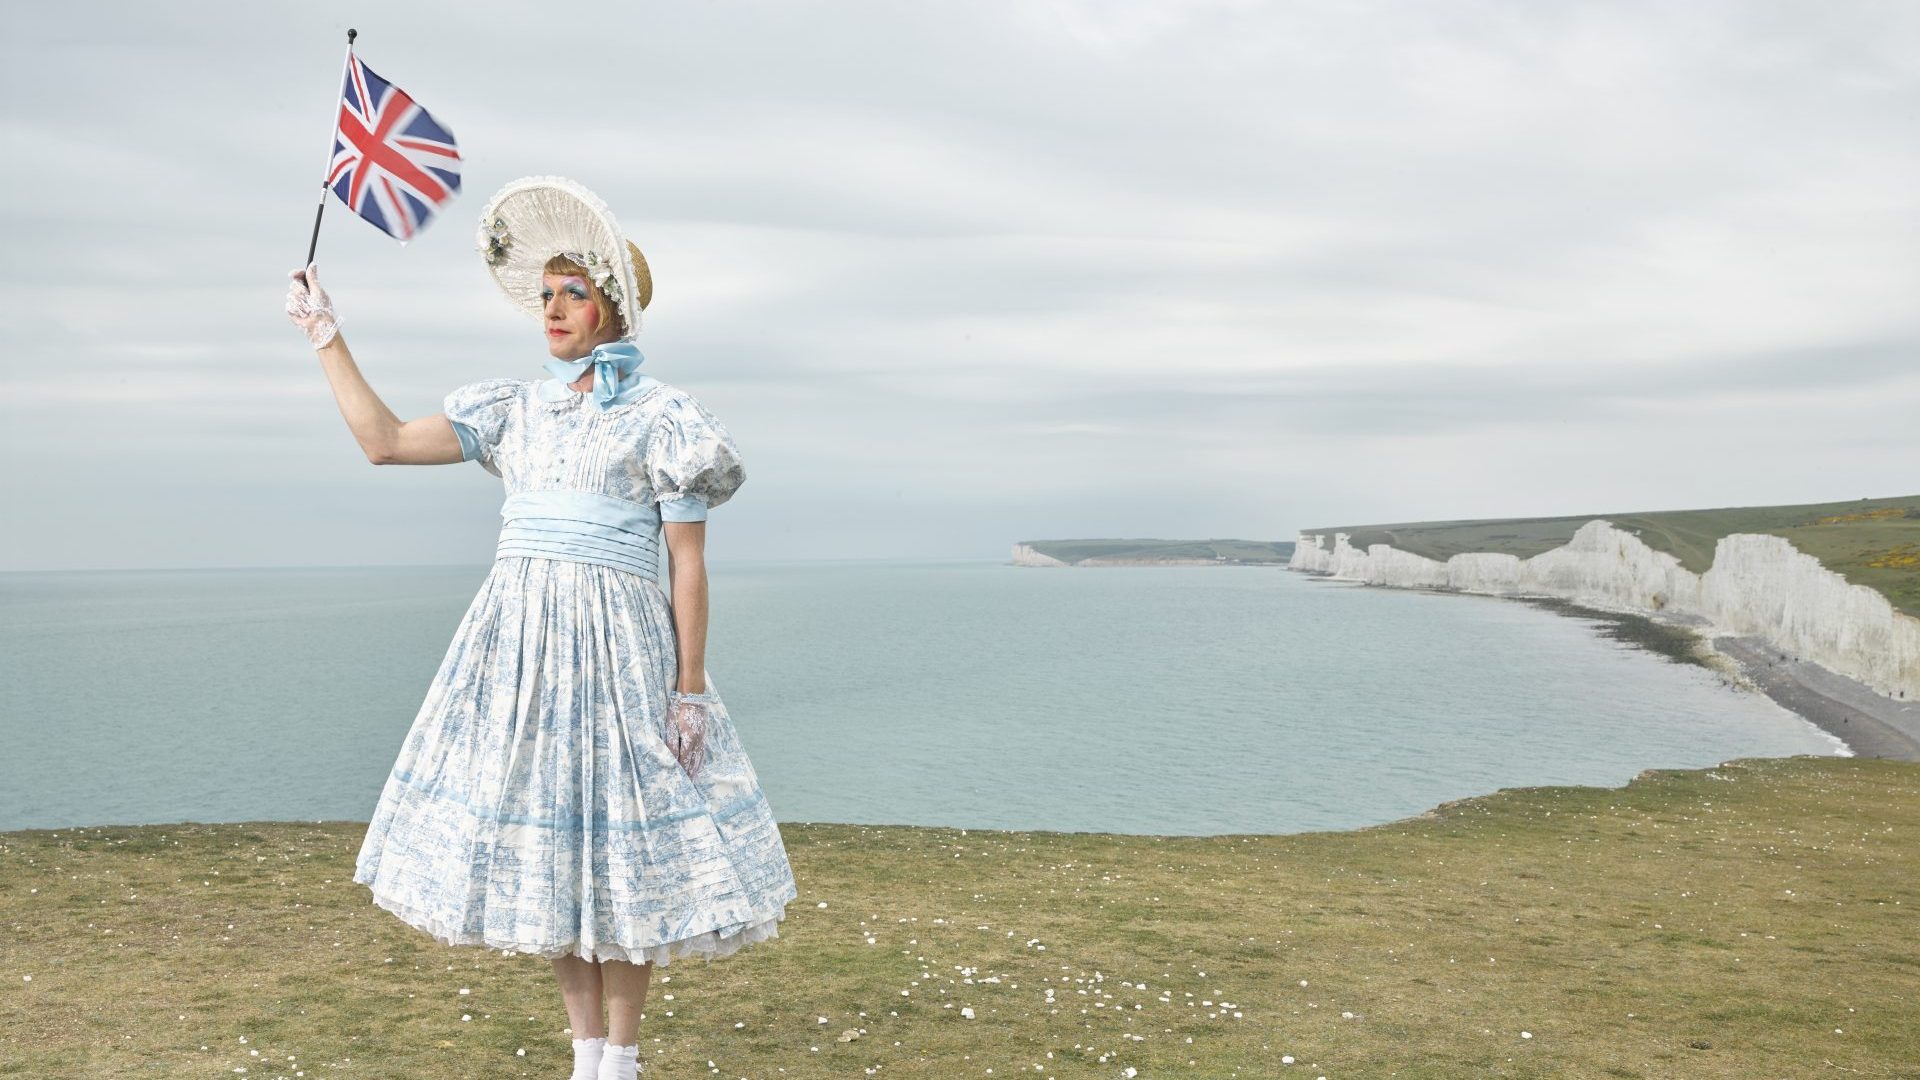 Richard Ansett’s iconic picture of Grayson Perry at Beachy Head, which the photographer imagined as “an ambivalent extended metaphor for Brexit that represents an idealised sense of Britishness conjured by the white cliffs and the suicidal ideation of the cliff edge”. Photo: Richard Ansett